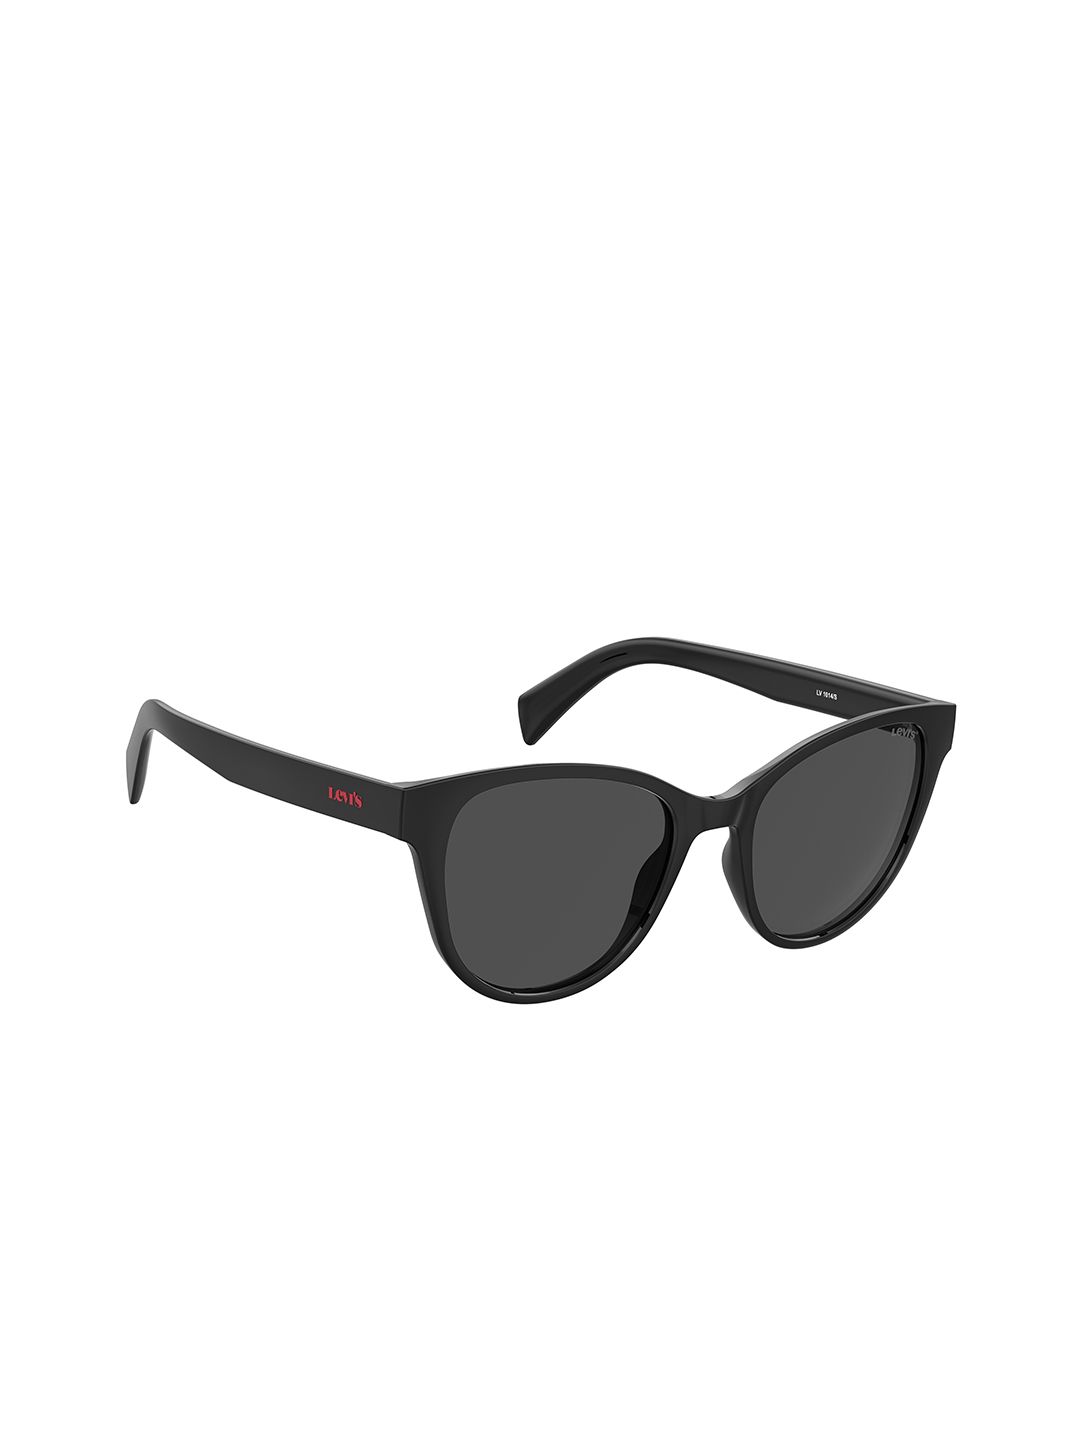 Levis Women Grey Lens & Black Round Sunglasses with UV Protected Lens Price in India